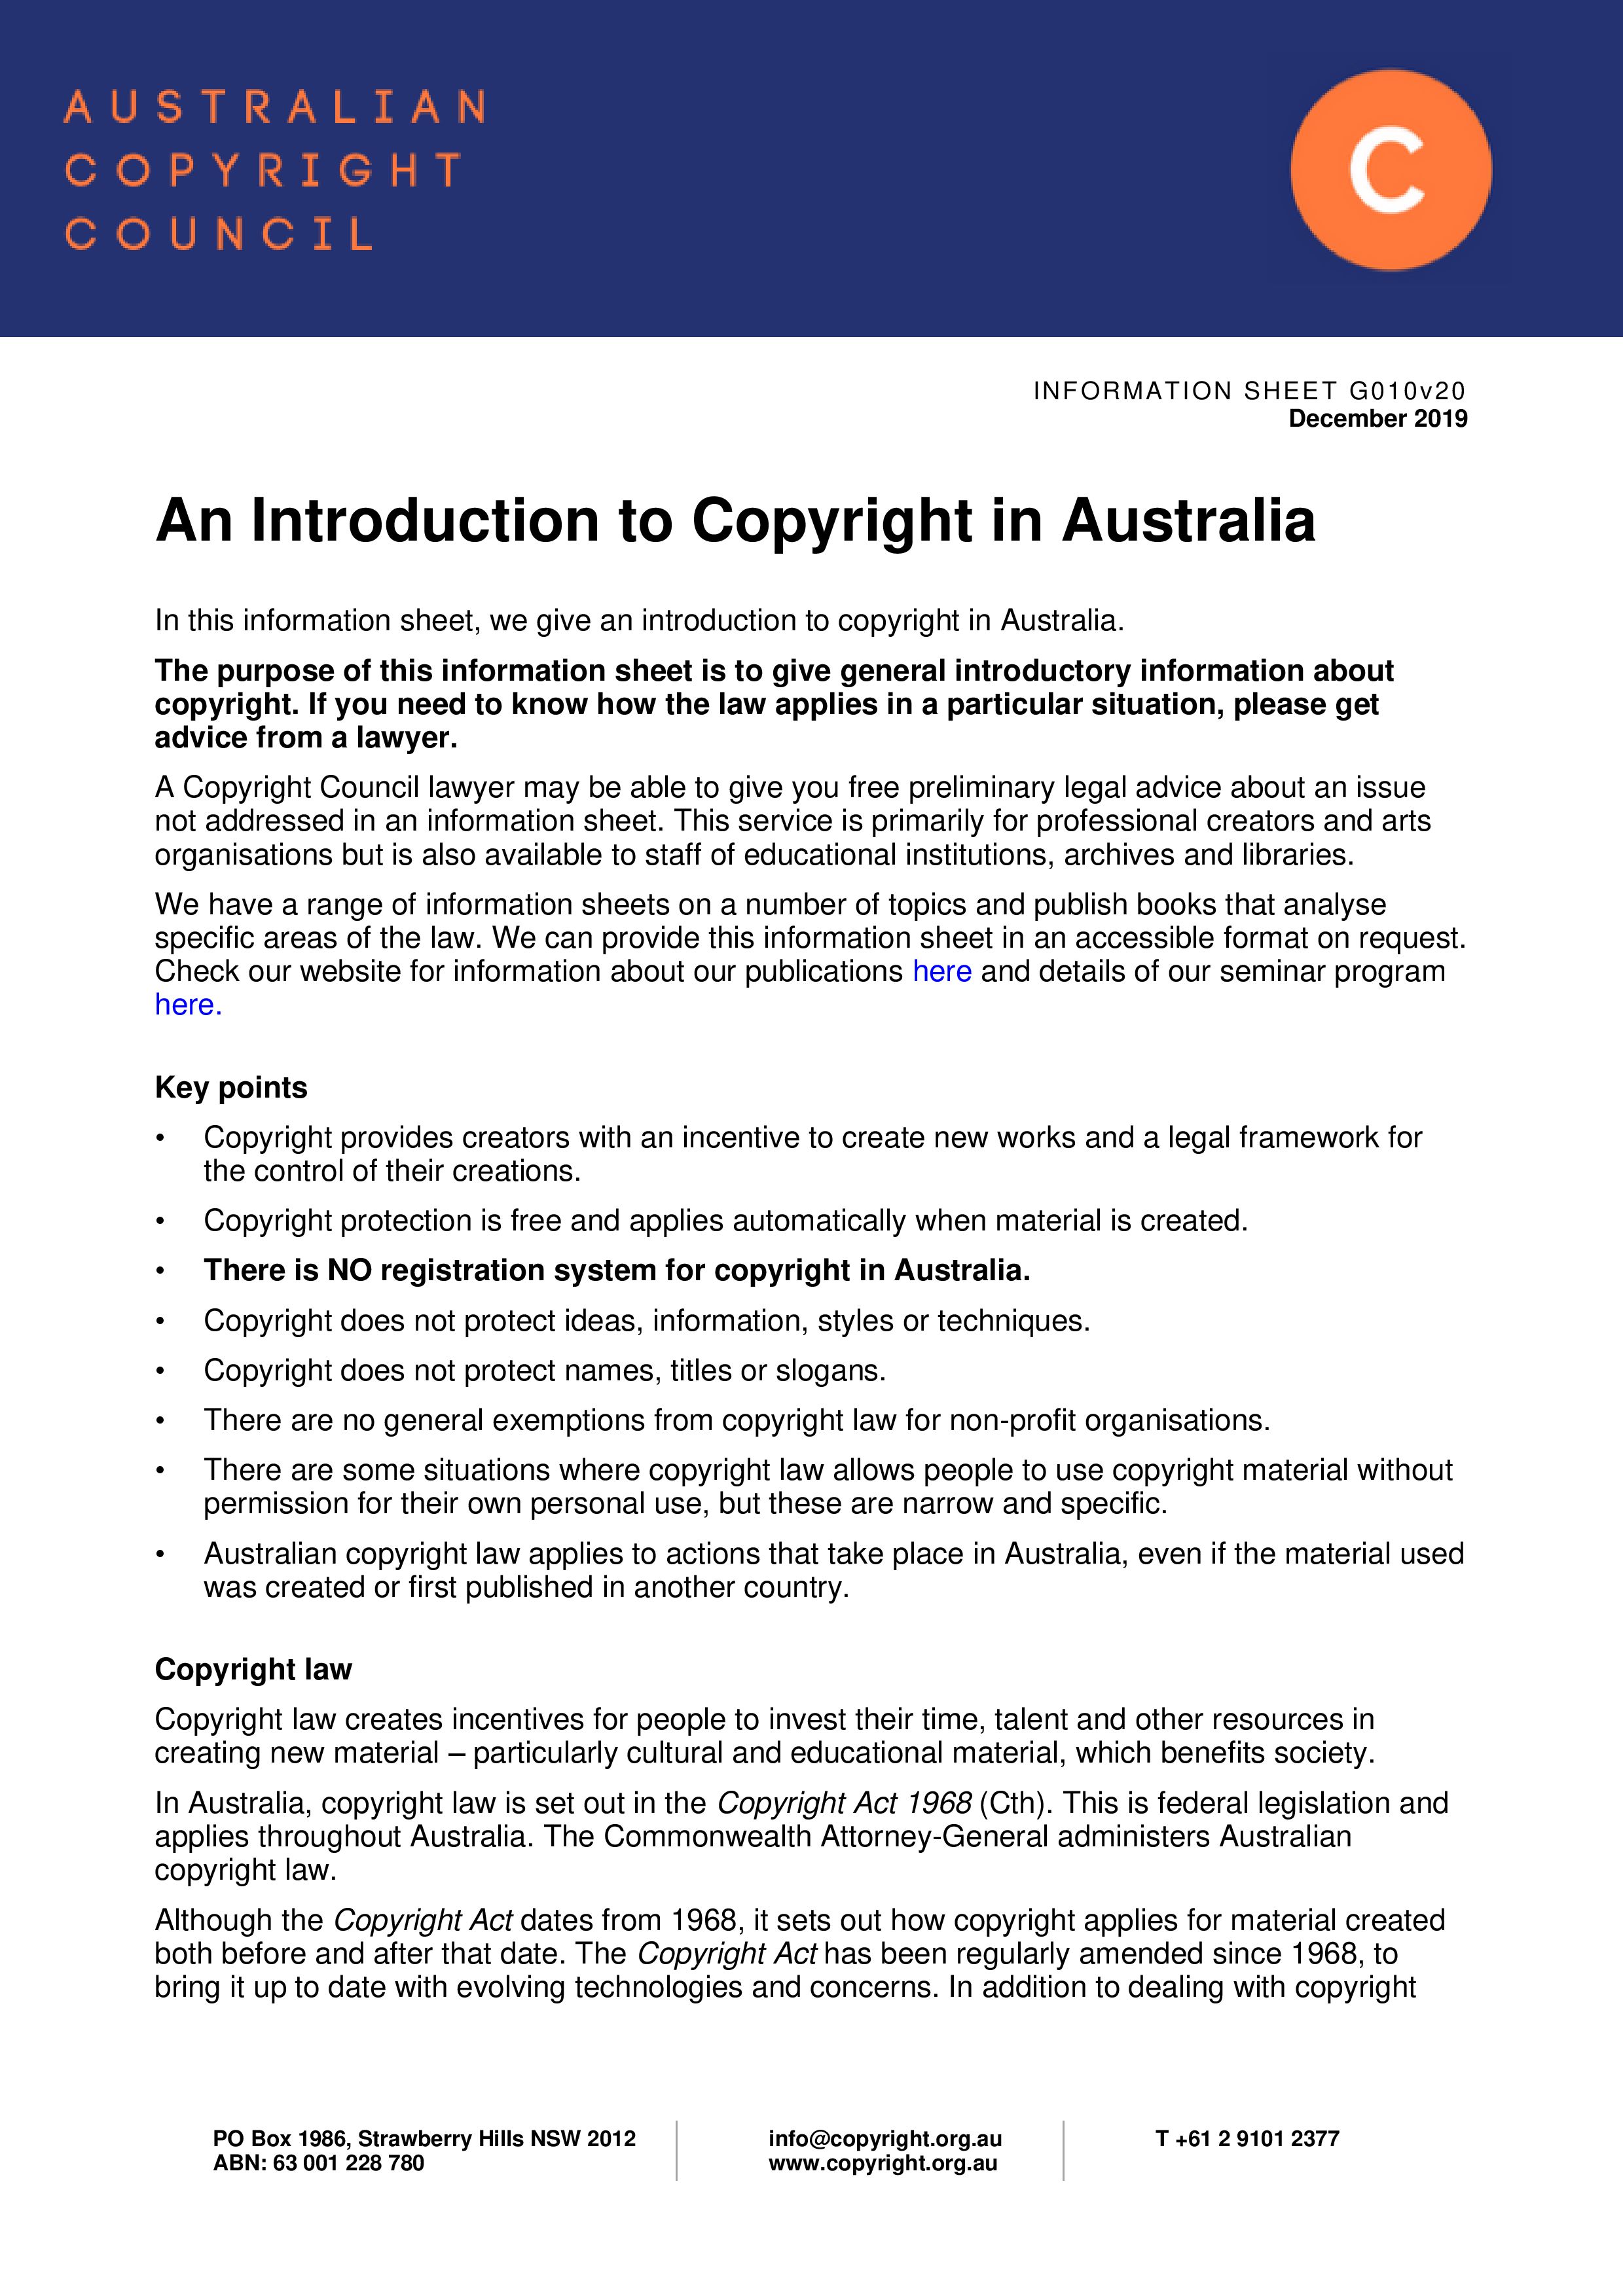 Introduction to Copyright in Australia 2019